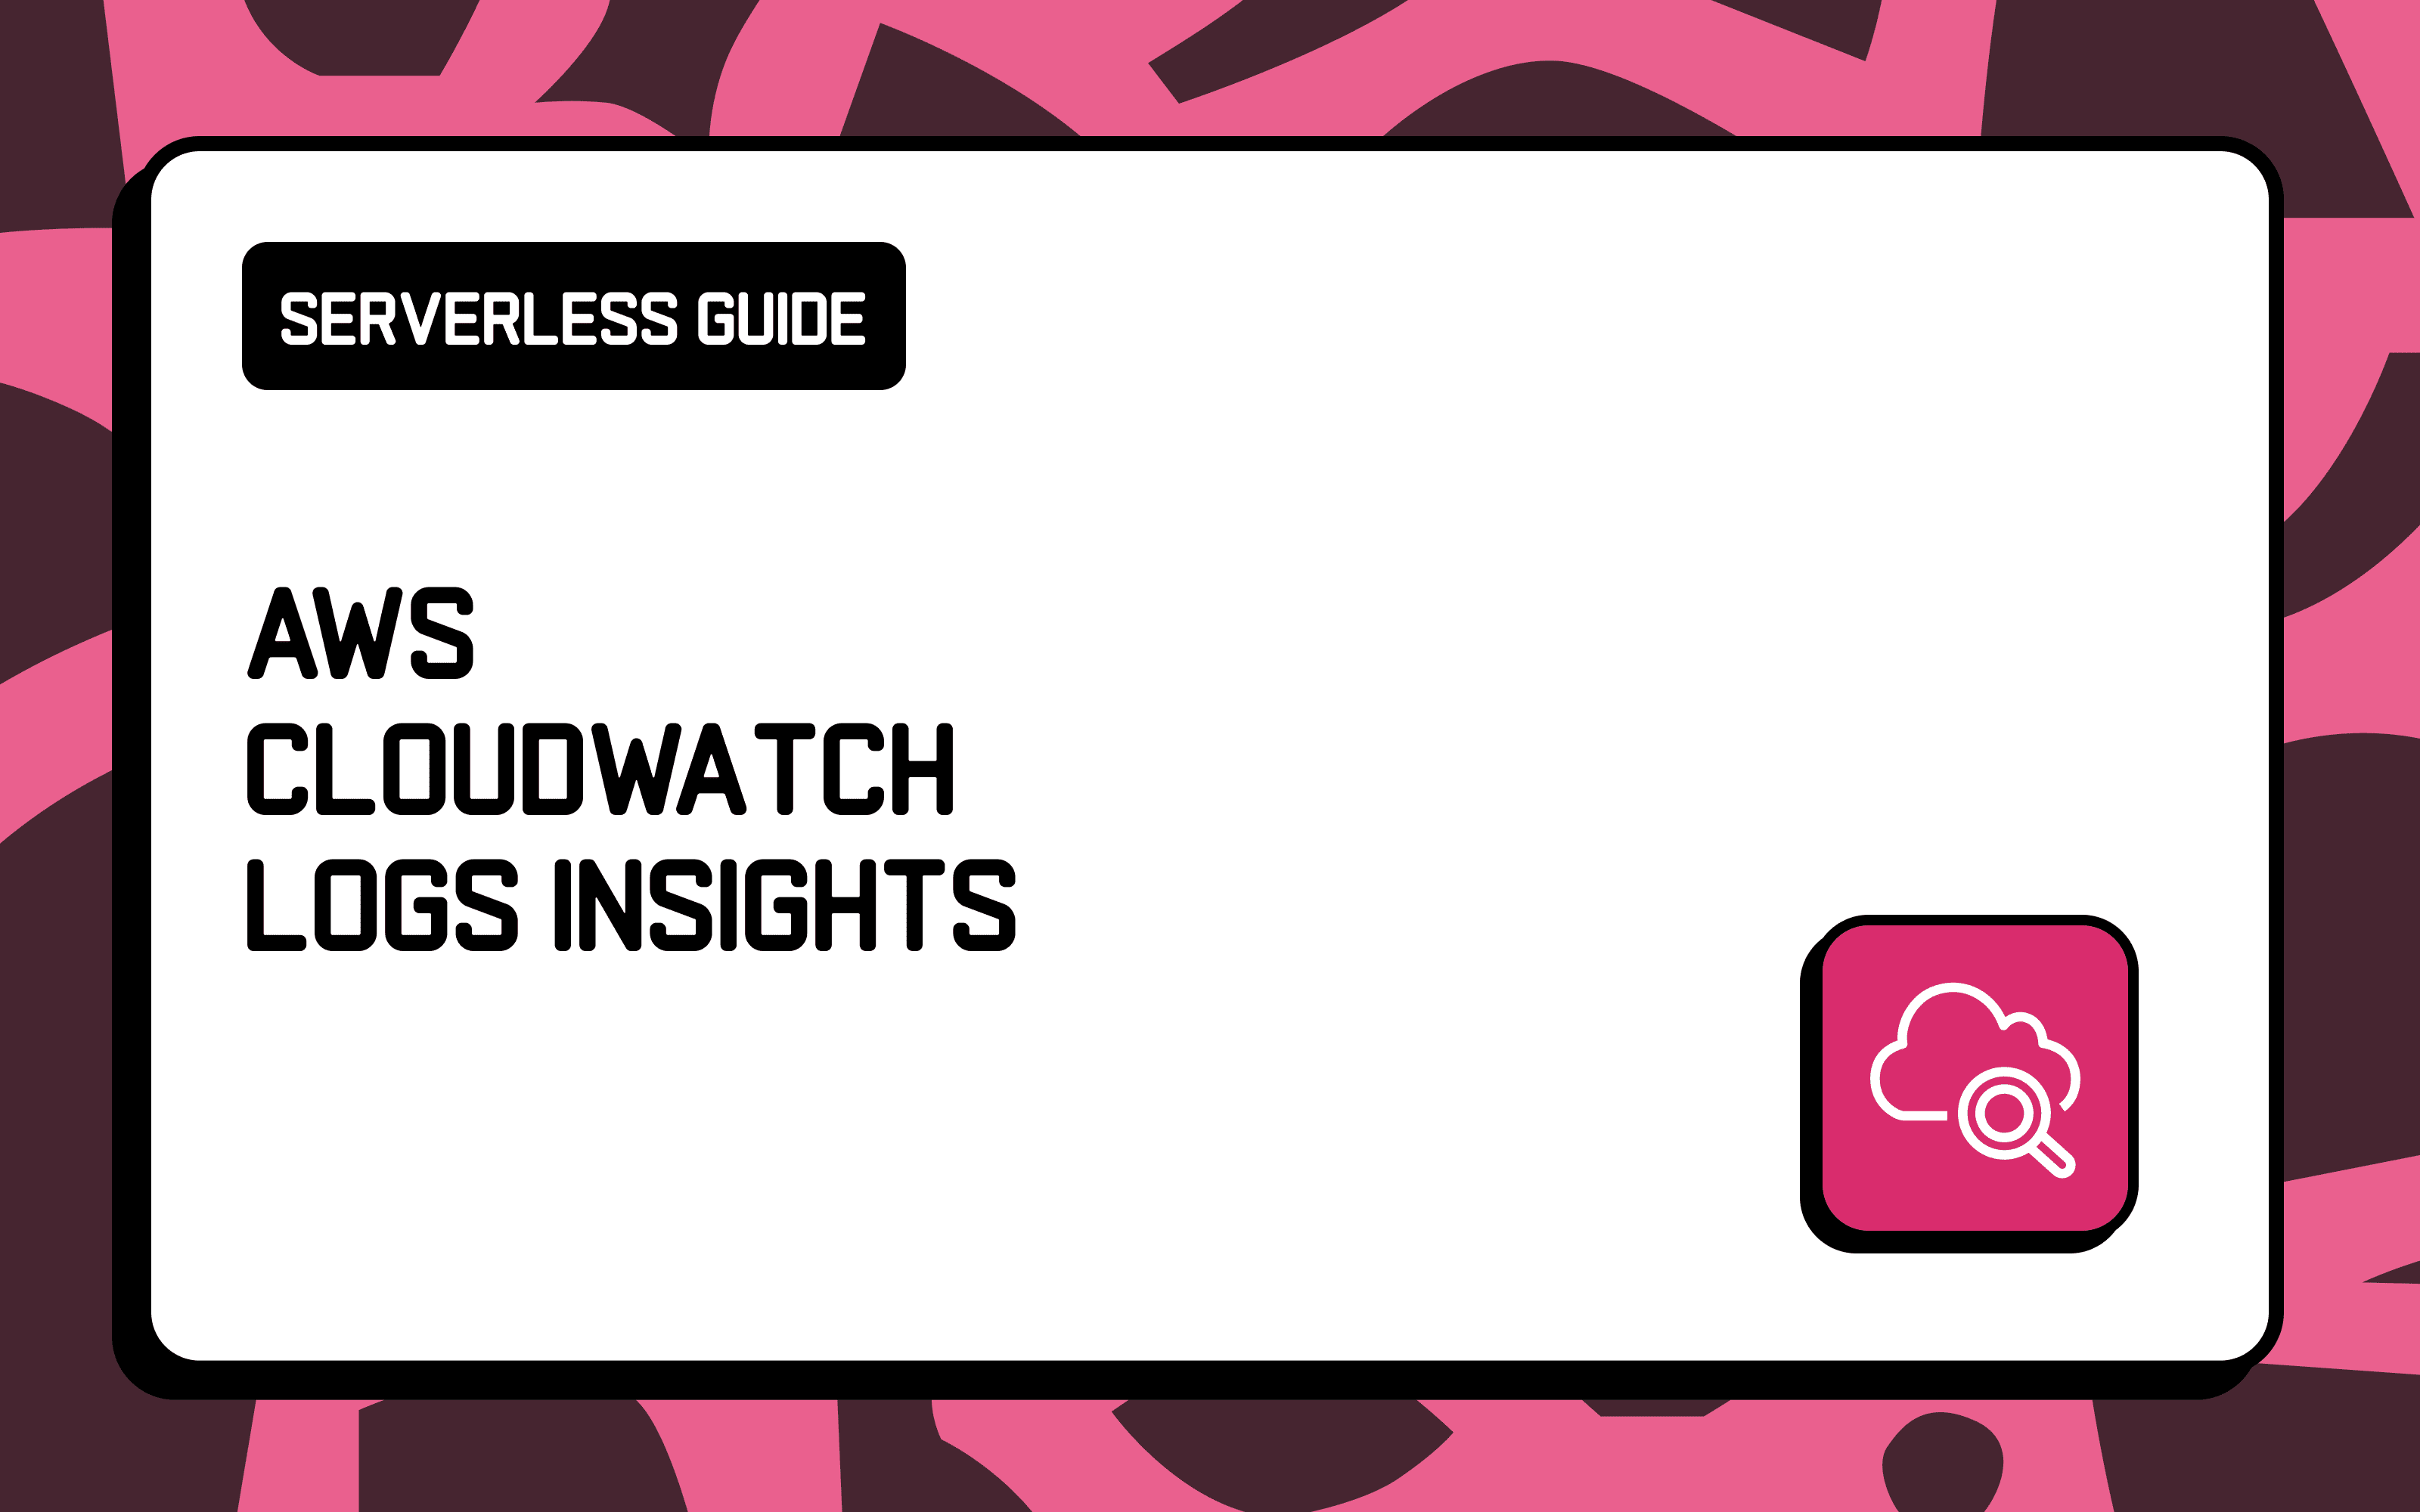 The Essential Guide to AWS CloudWatch Logs Insights for Serverless